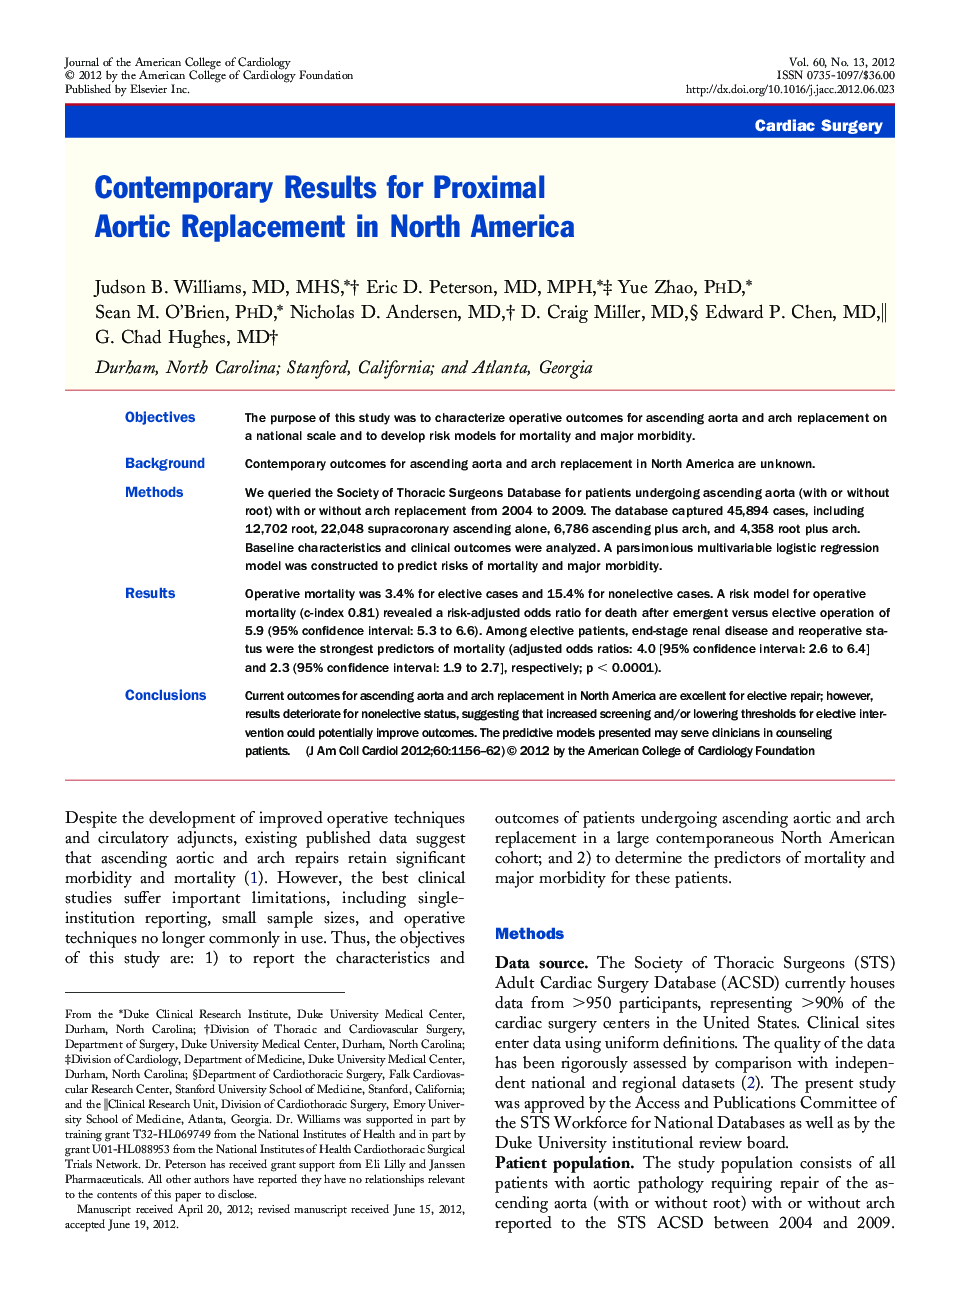 Contemporary Results for Proximal Aortic Replacement in North America 